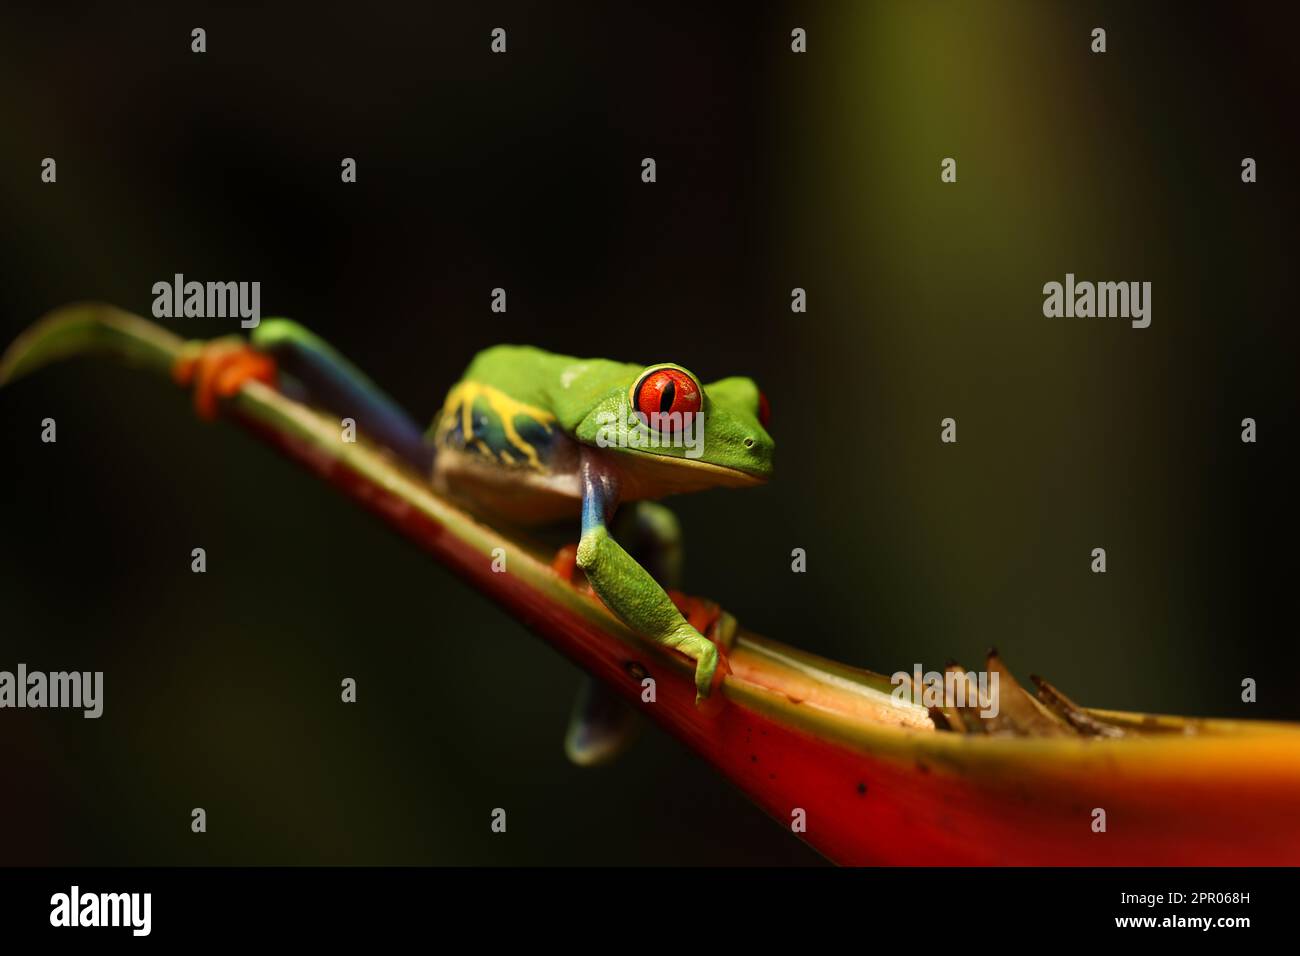 Red eyed tree frog on flower at border of Panama and Costa Rica in the tropical rainforest, cute night animal with vivid colors and big eye, agalychni Stock Photo